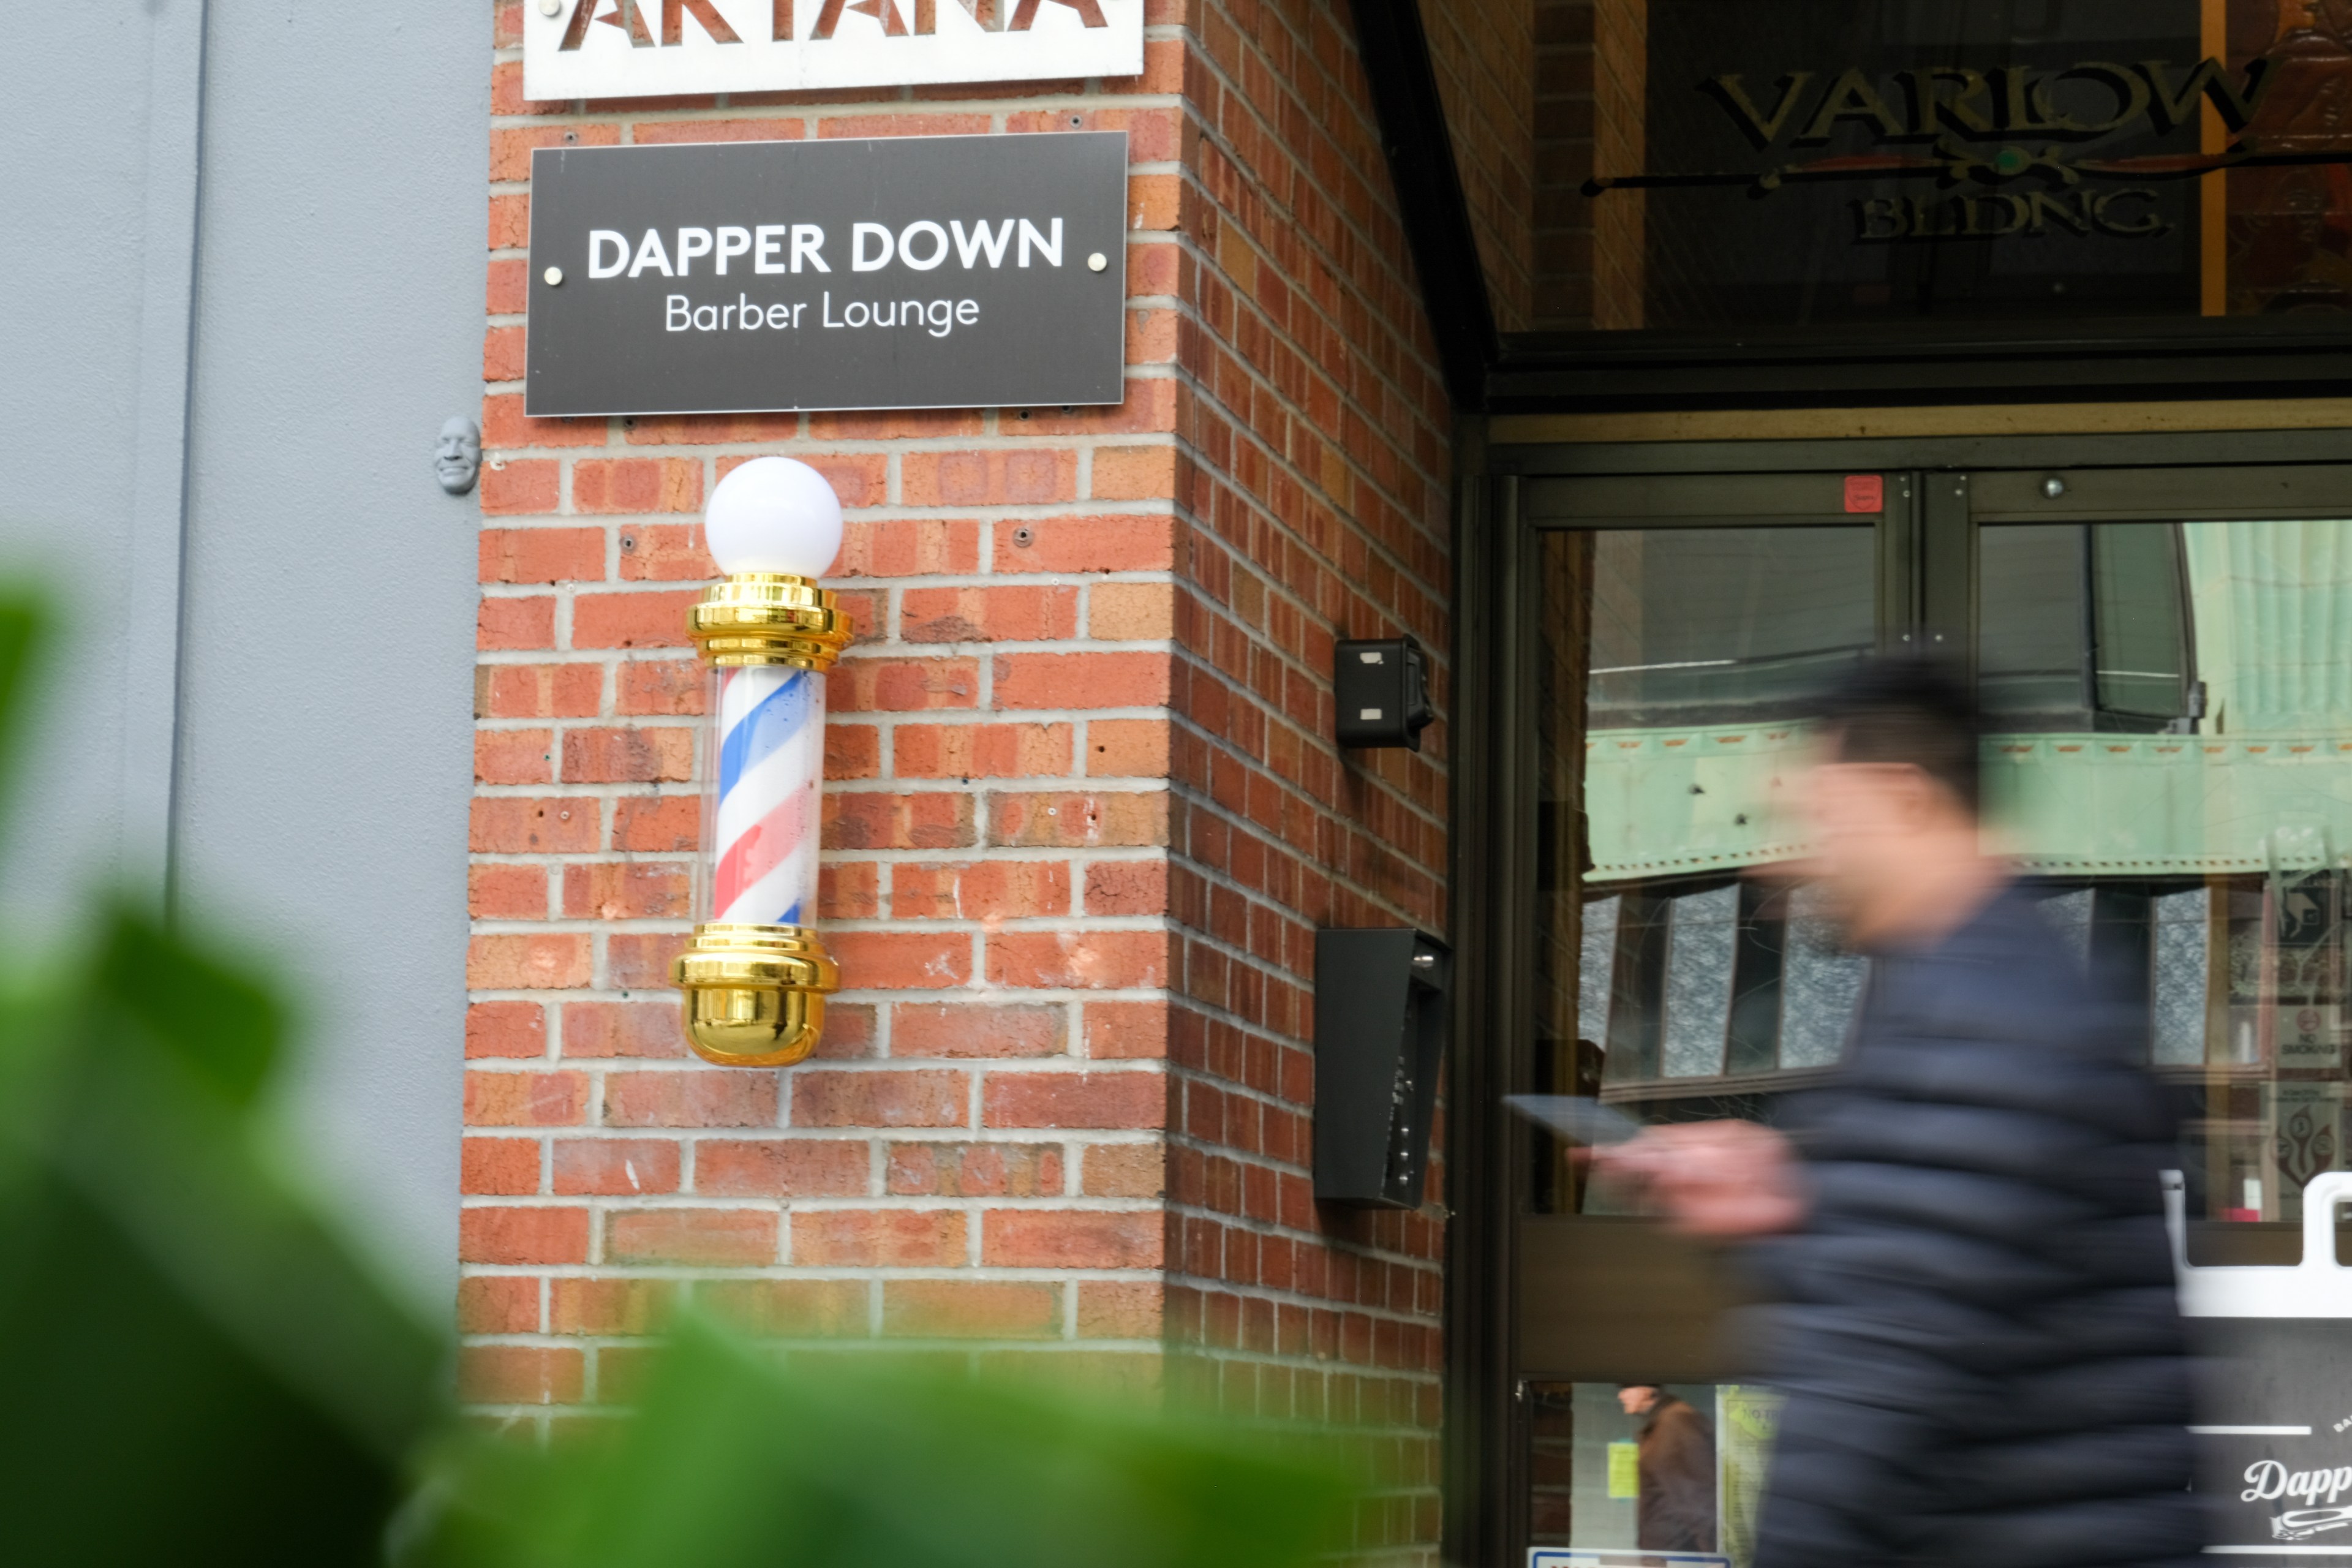 A rotating barber's pole with a blurred person walking by outside a barber lounge.